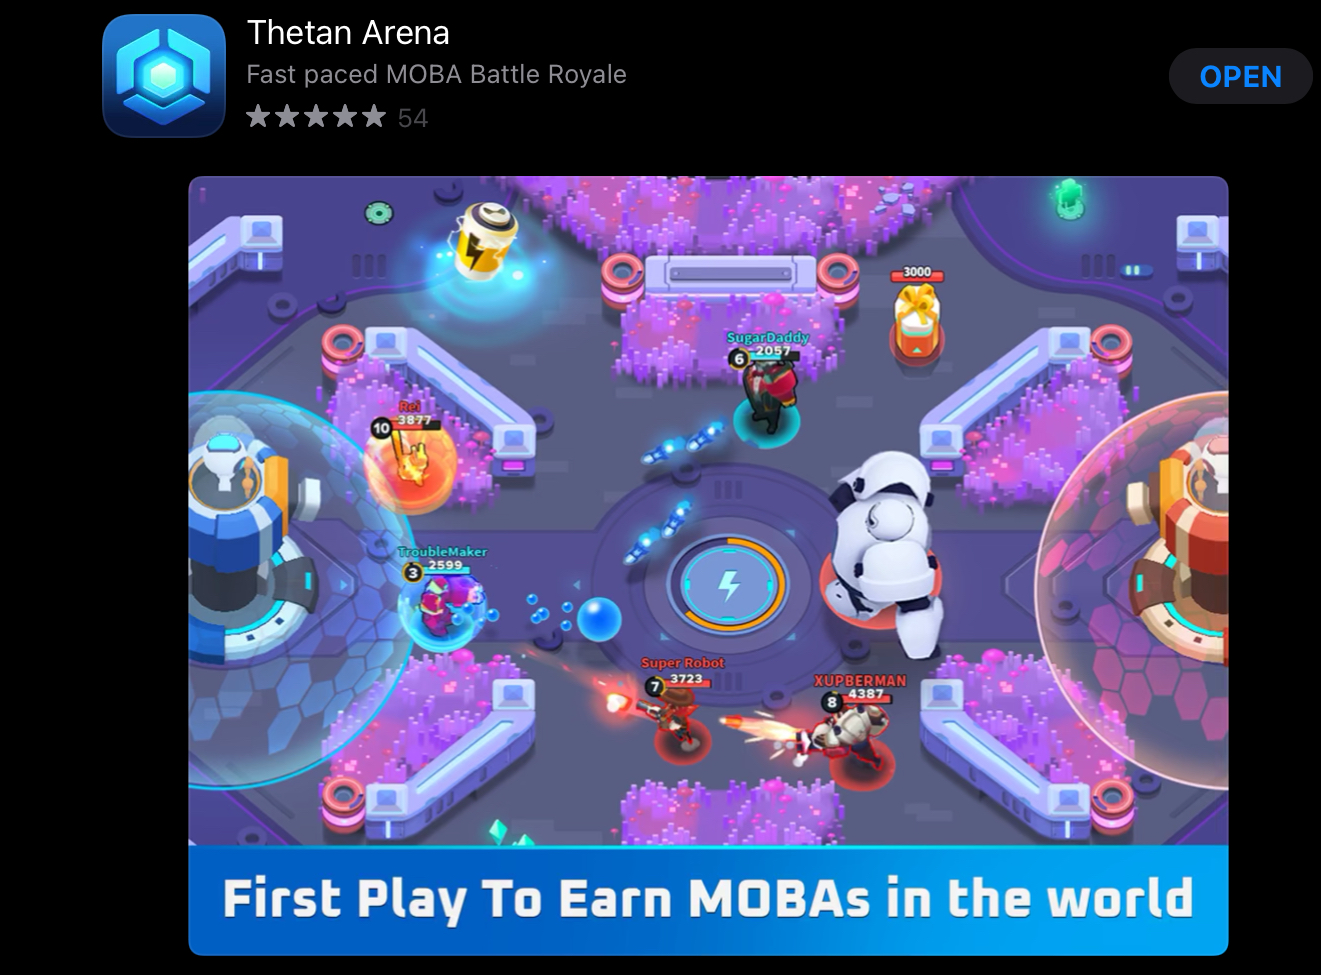 Thetan Arena goes to number 1 in play-to-earn games on App Store